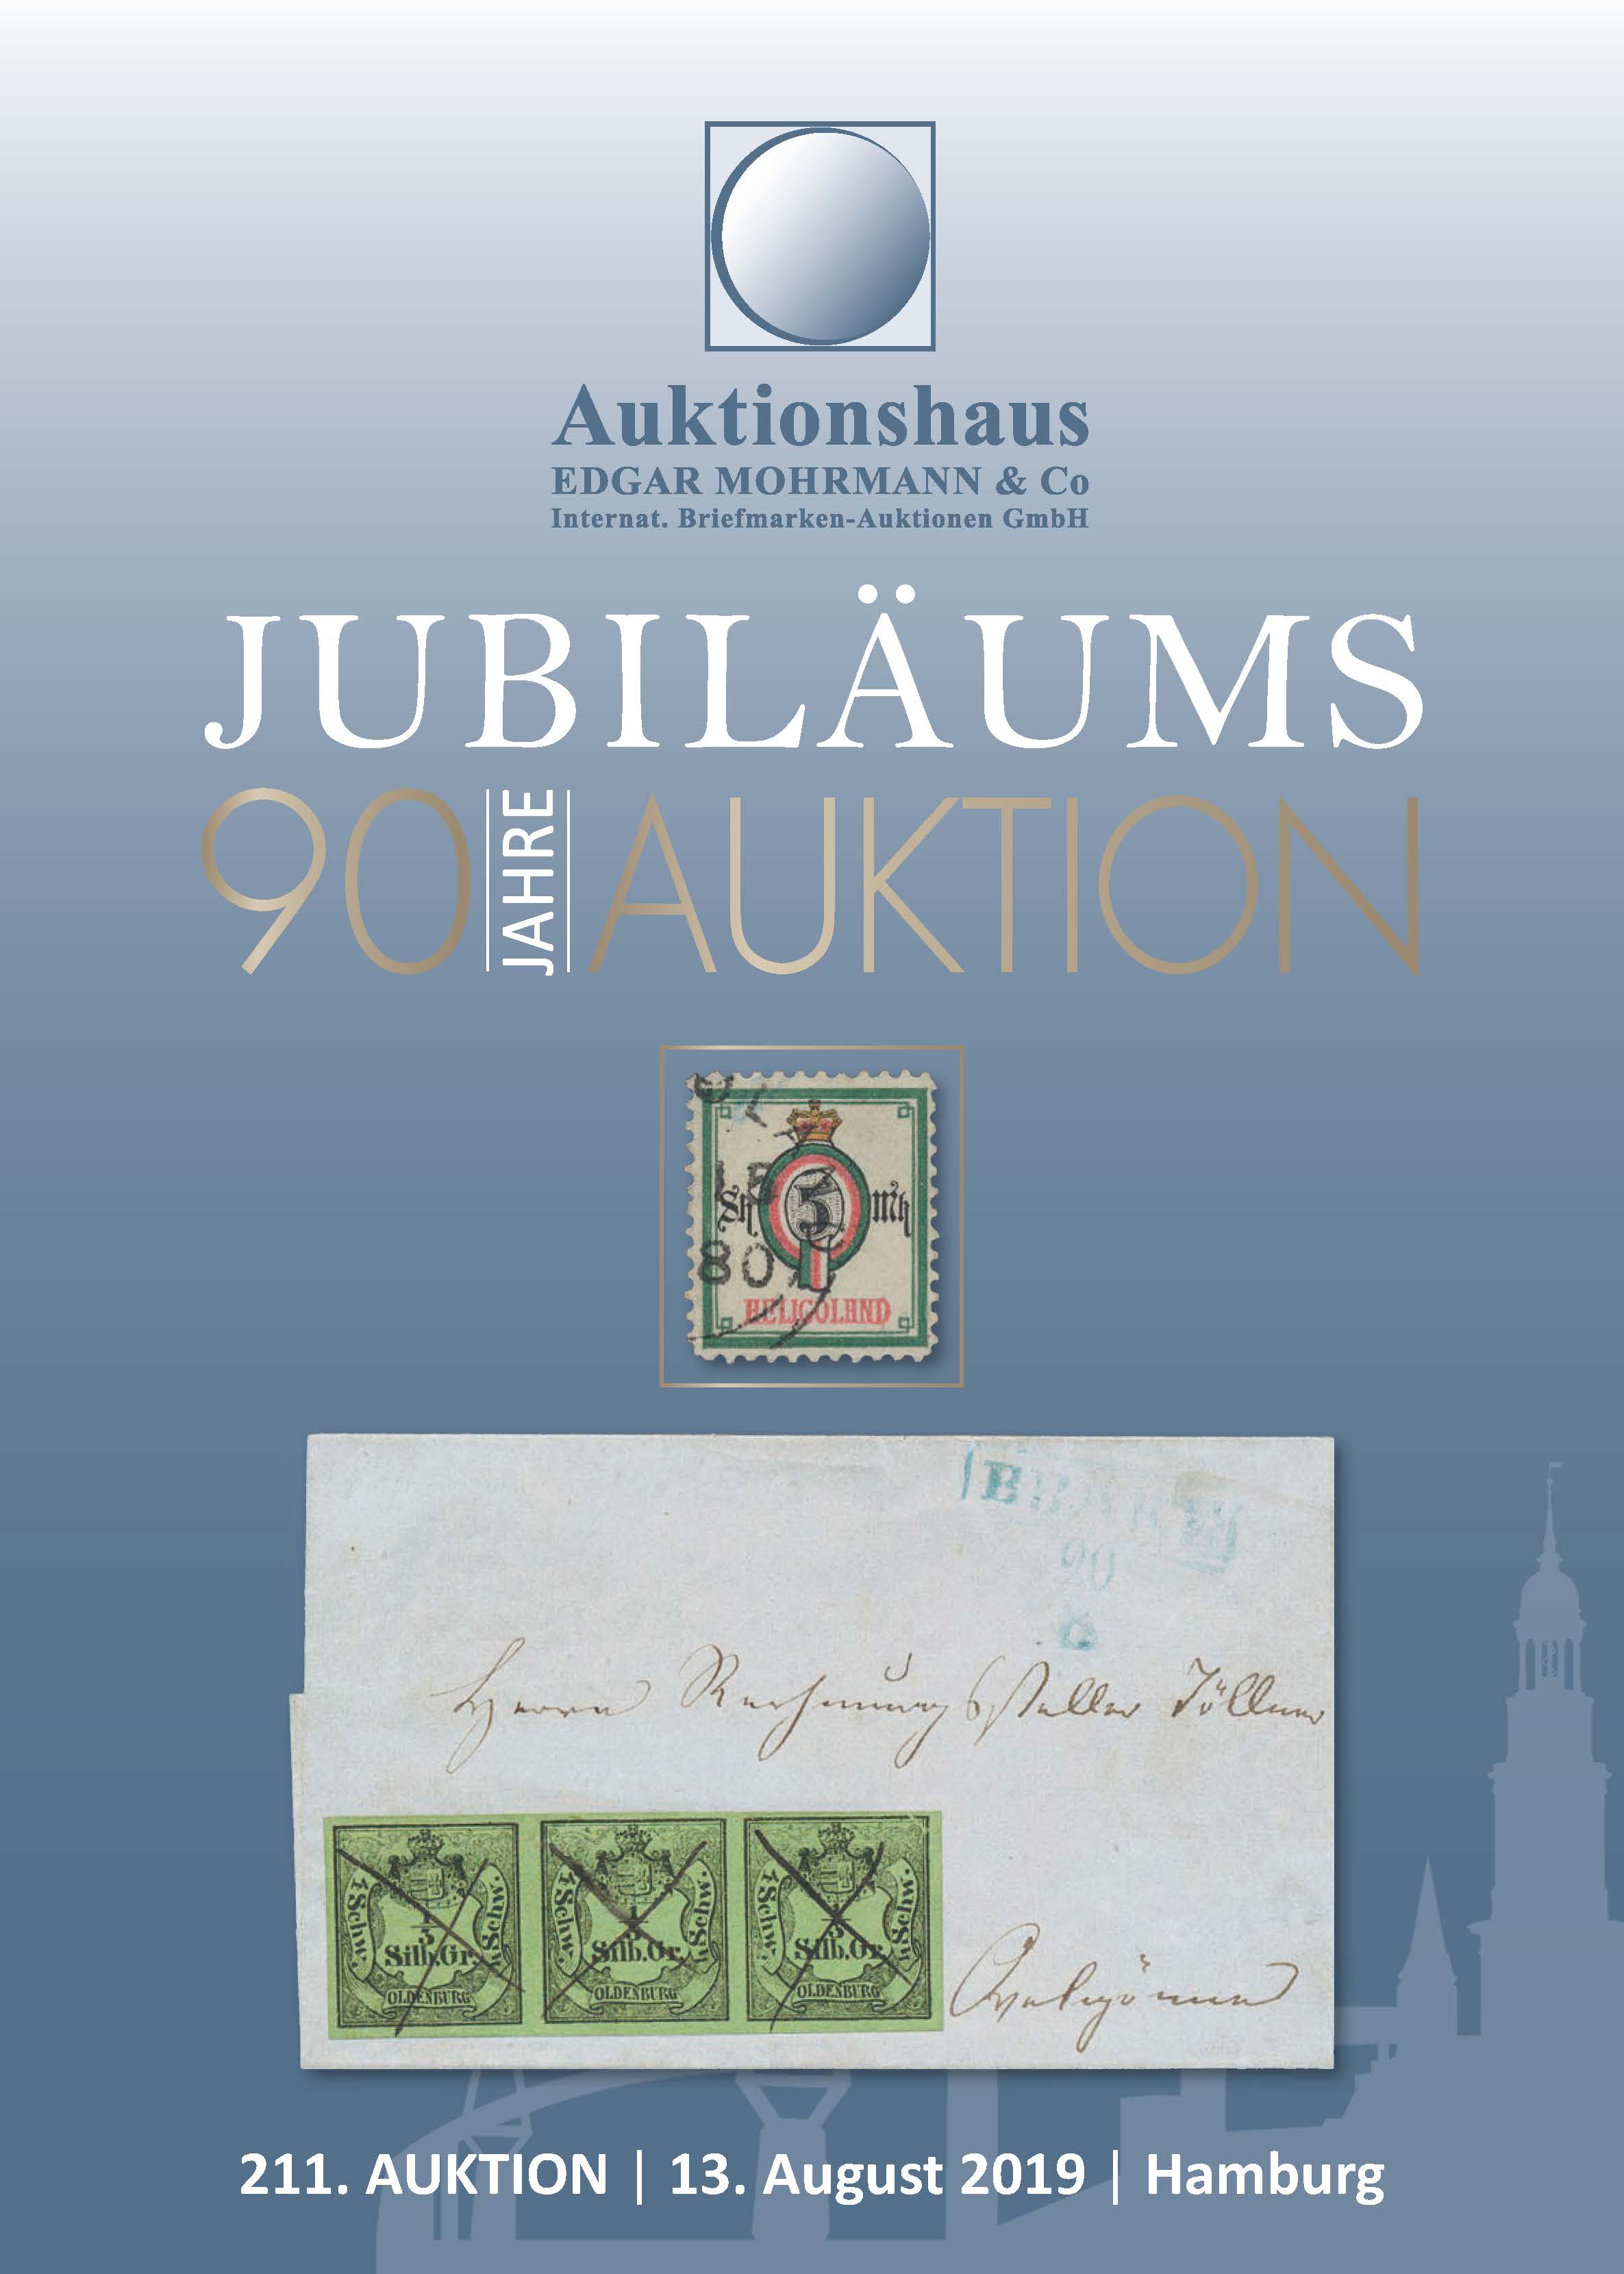 titel page of the catelogue for the 2011 Edgar Mohrman auction (August 2019) marking 90 years of the company